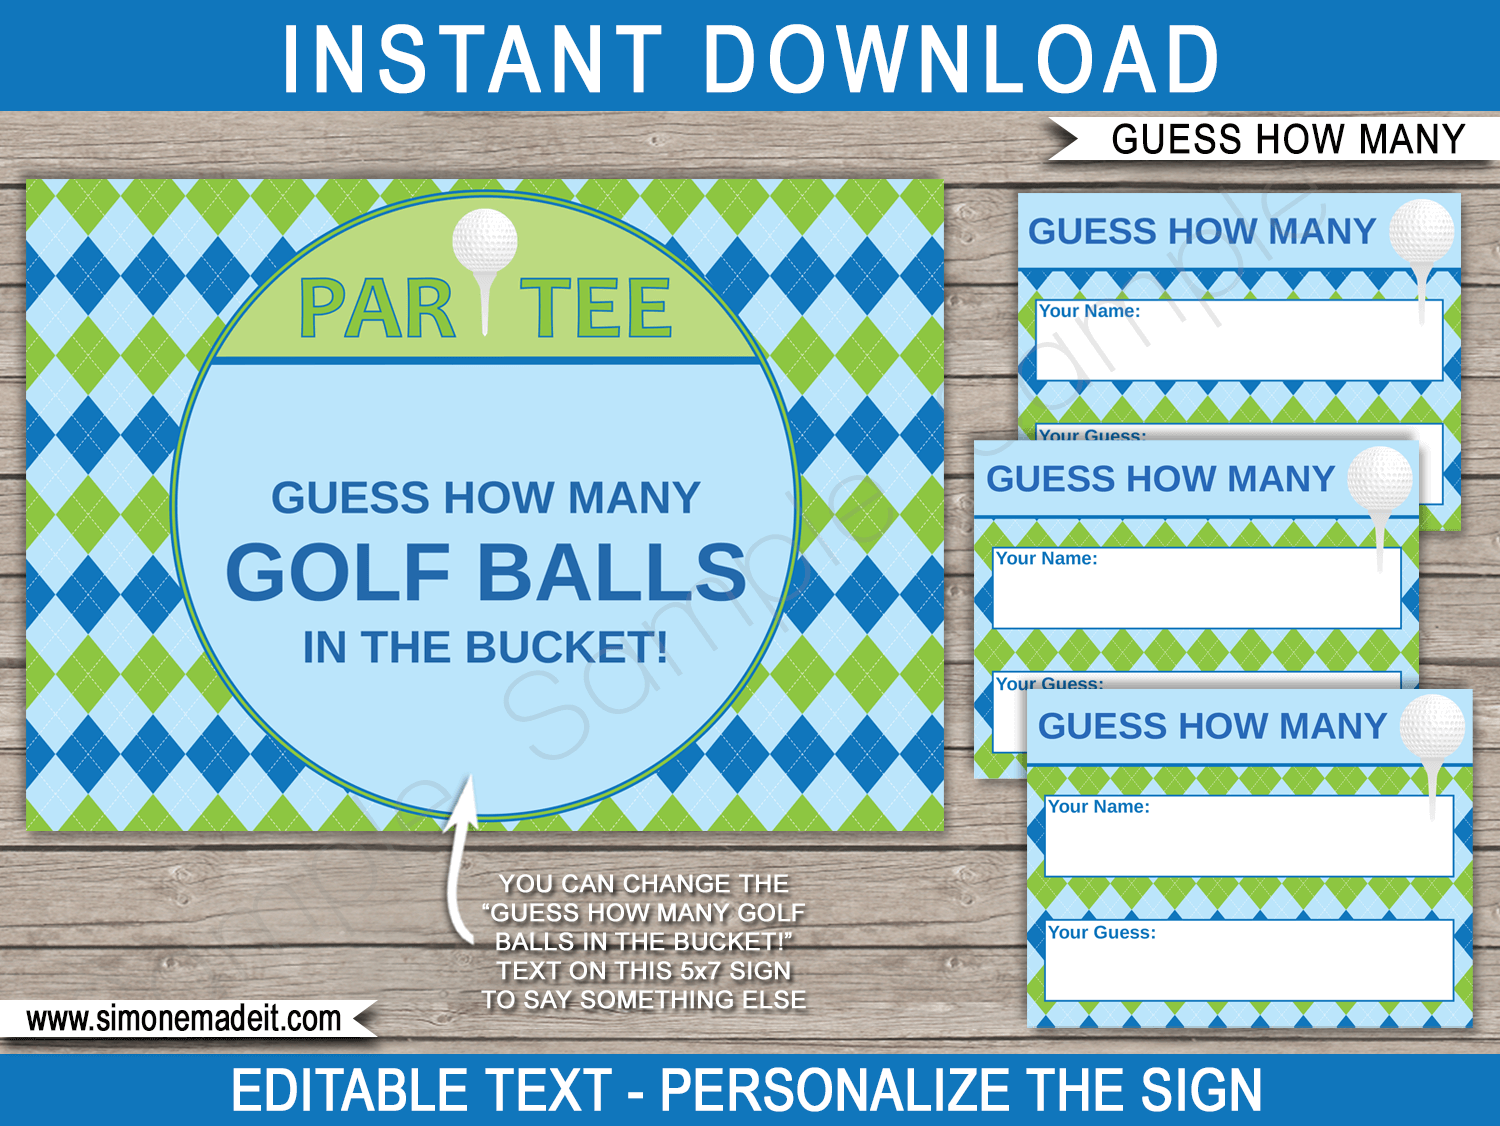 Golf Party Guess How Many Game Printable Template | Birthday Party Games | DIY Editable Text |  $3.00 INSTANT DOWNLOAD via simonemadeit.com